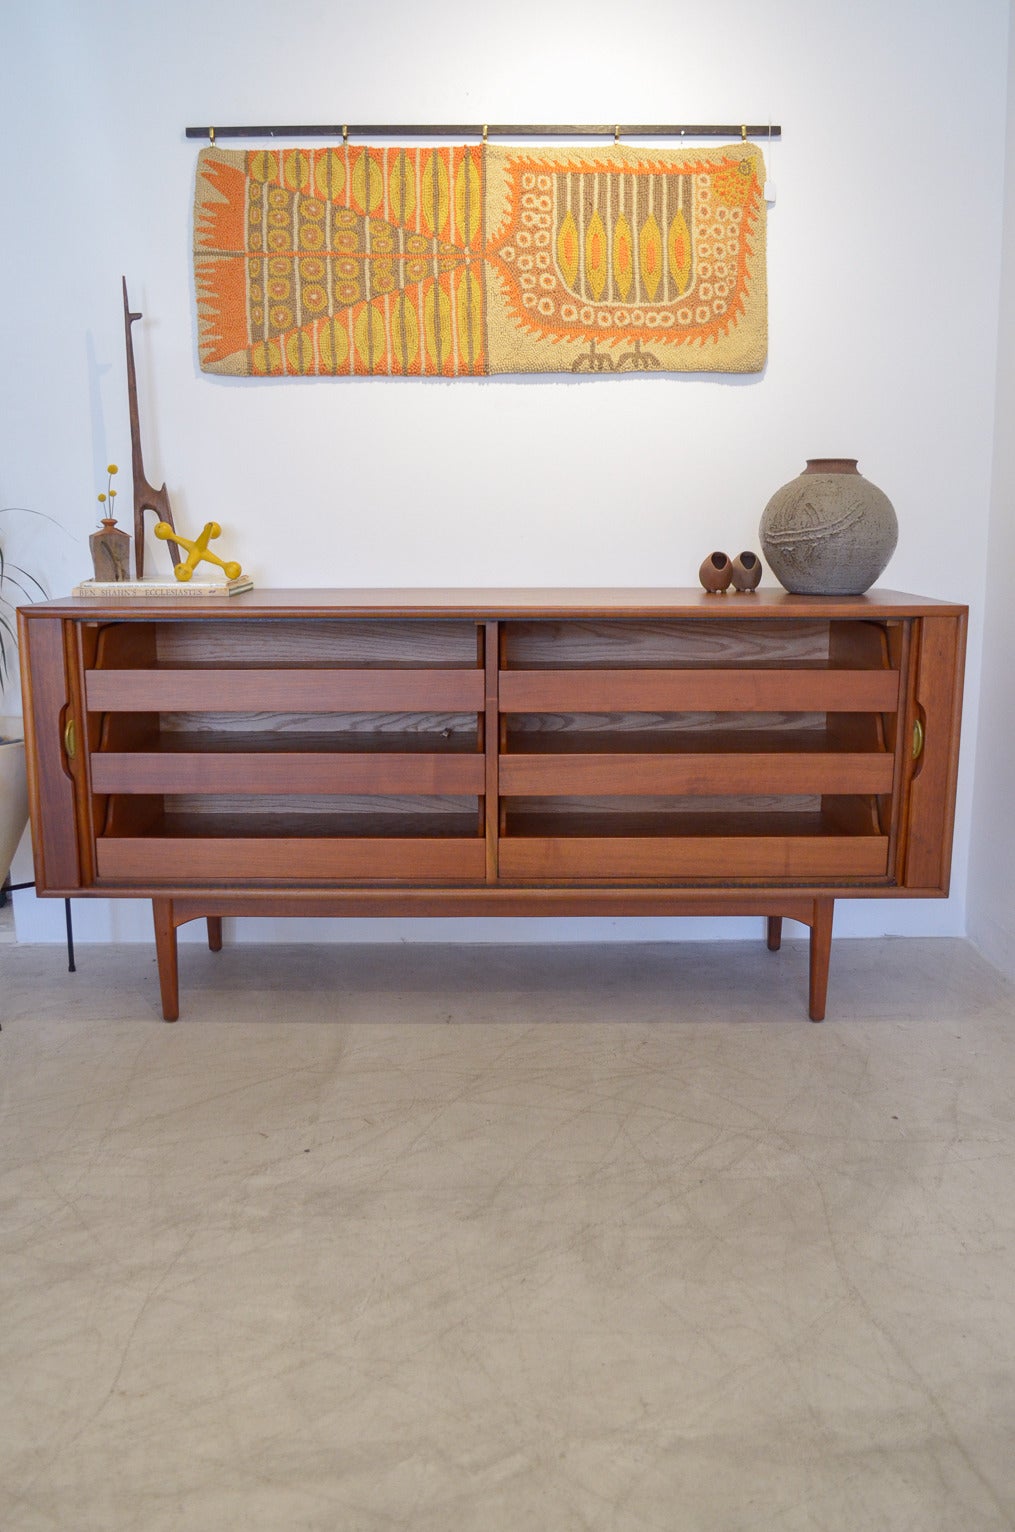 Stunning walnut tambour door credenza by Kipp Stewart for Drexel's Declaration line. Lovely lines, tambour doors glide smoothly and open to reveal shelving on the inside. Drawers roll smoothly and tambour doors are highlighted by beautiful brass